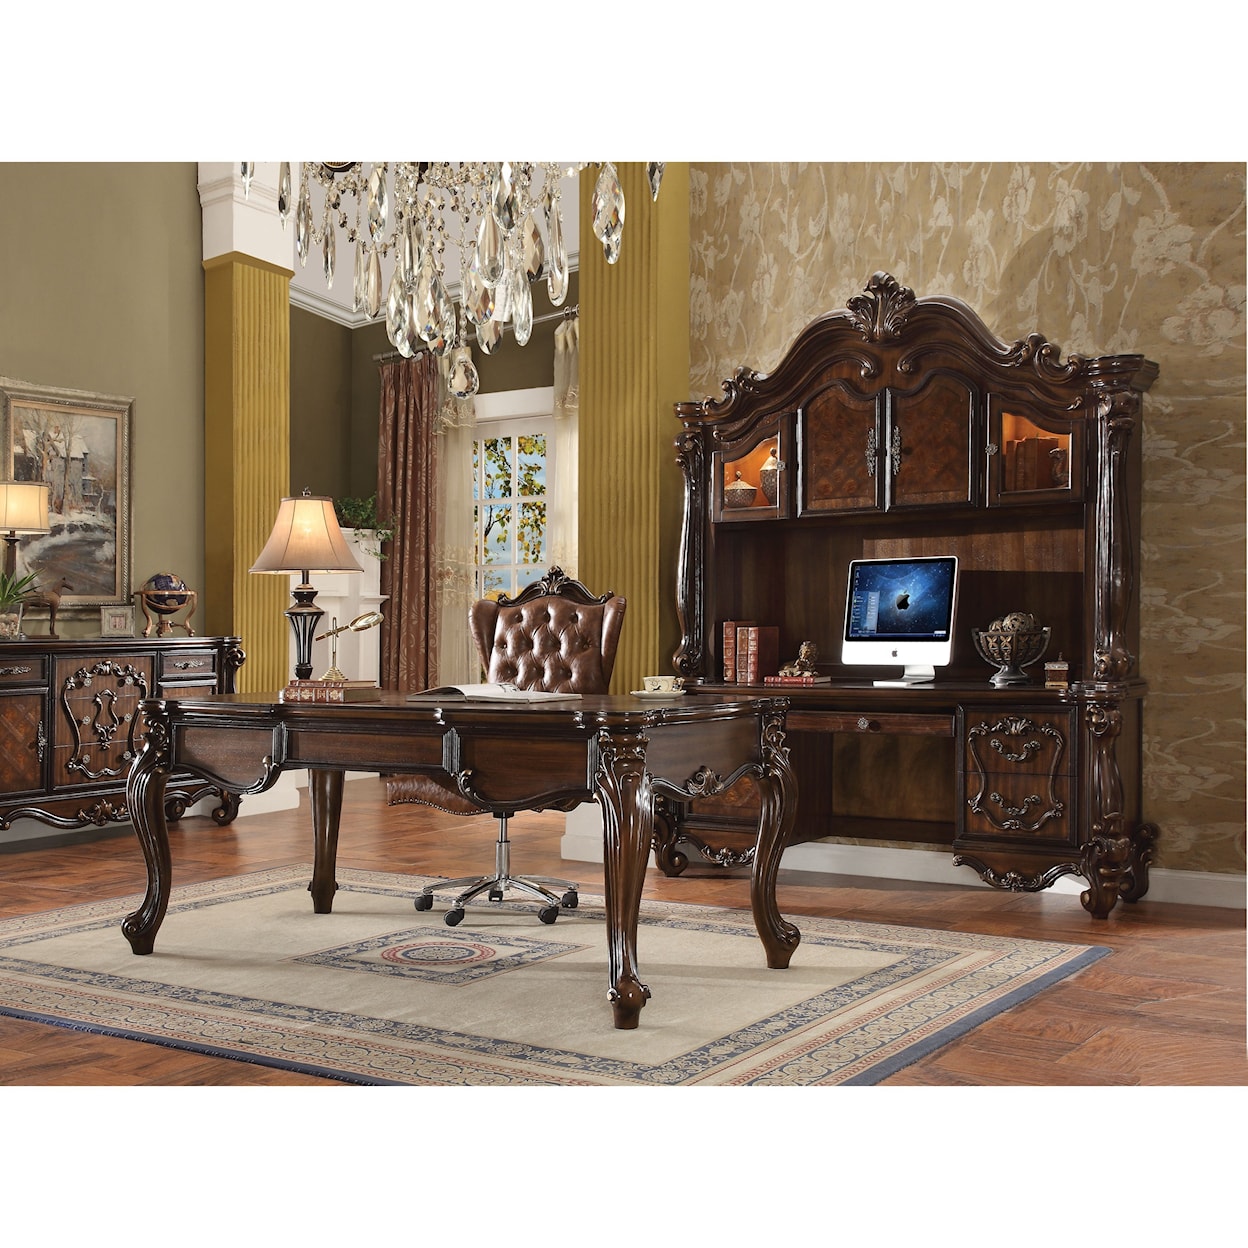 Acme Furniture Versailles Executive Office Chair